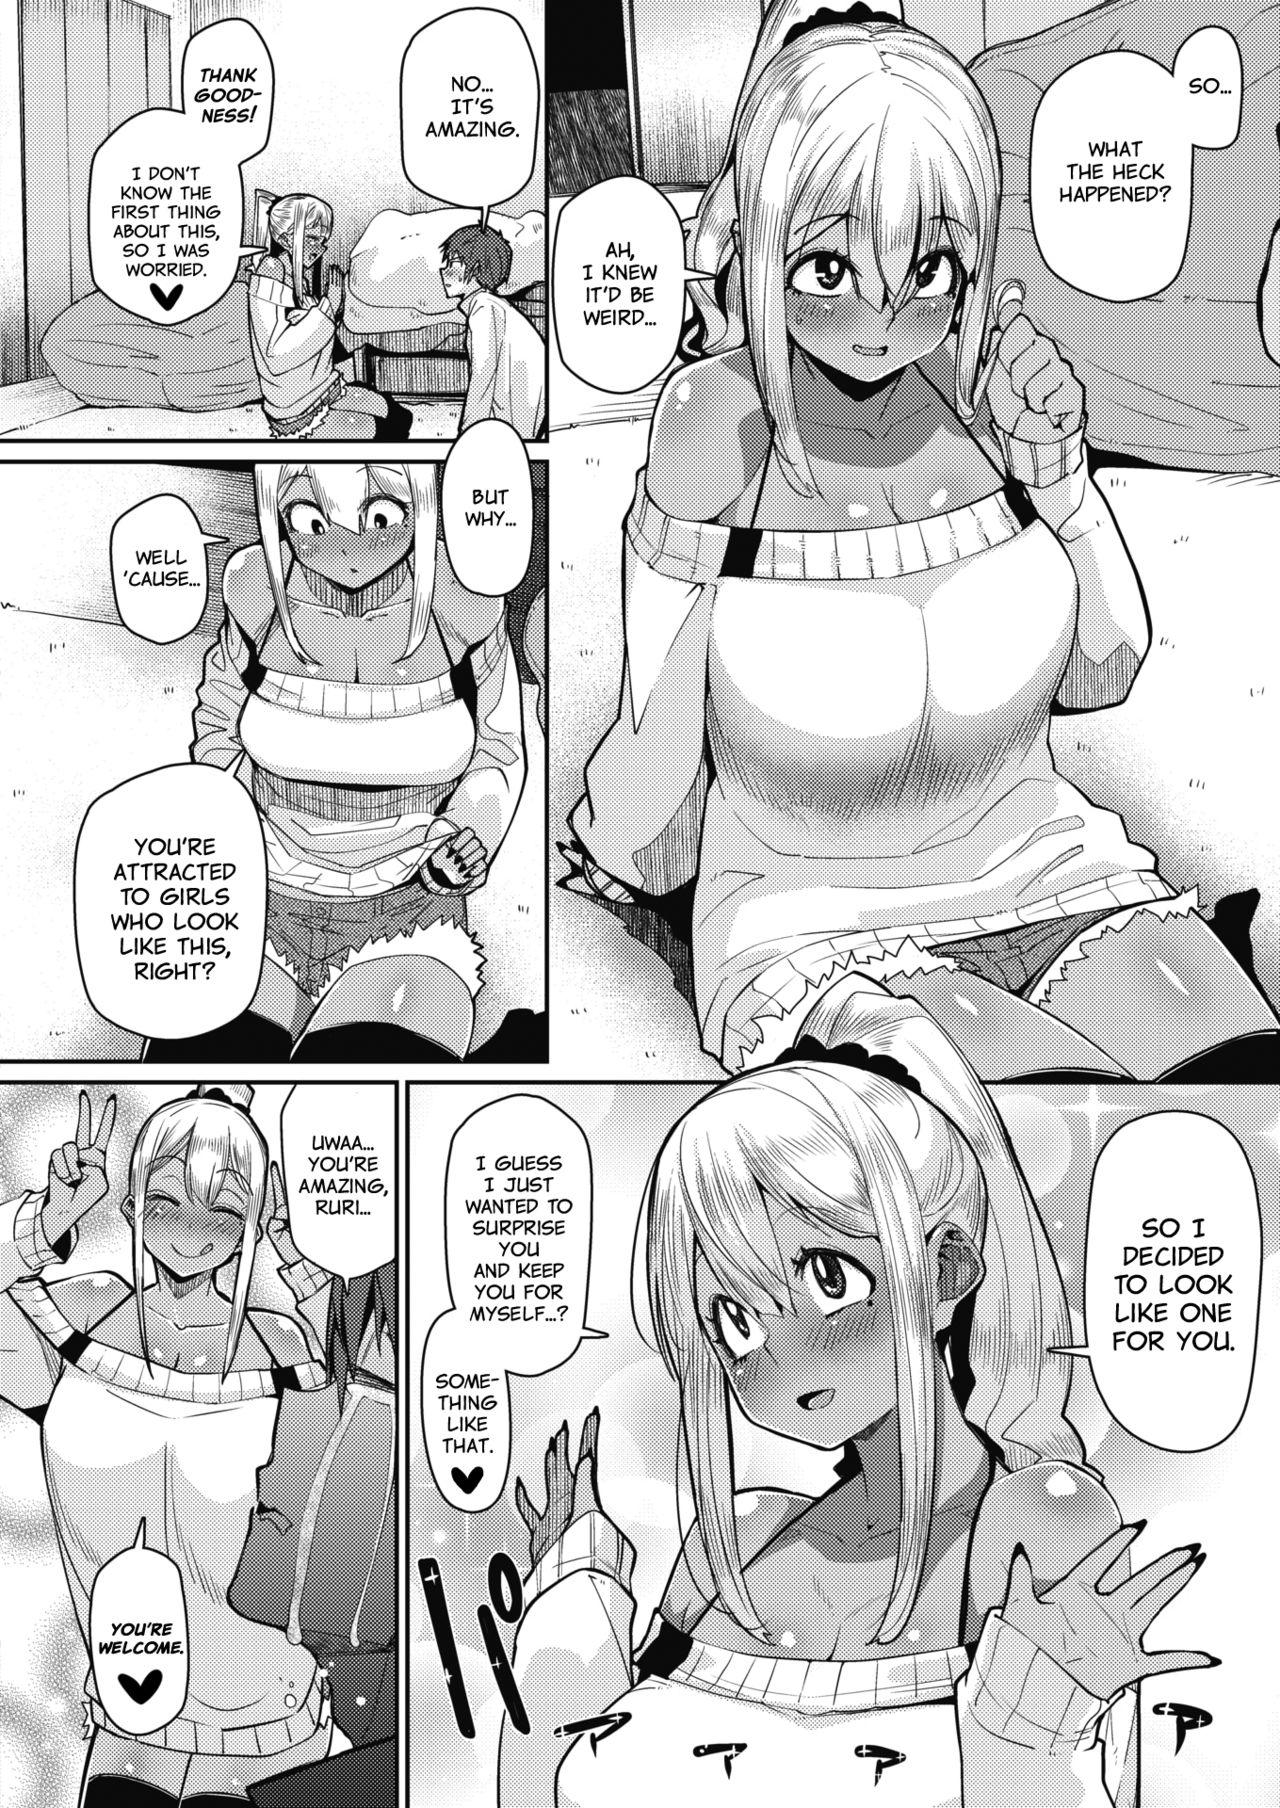 Trans Gekkan "The Bitch" o Mita Onna no Hannou ni Tsuite | About the Reaction of the Girl Who Saw "The Bitch Monthly" Rebolando - Page 4